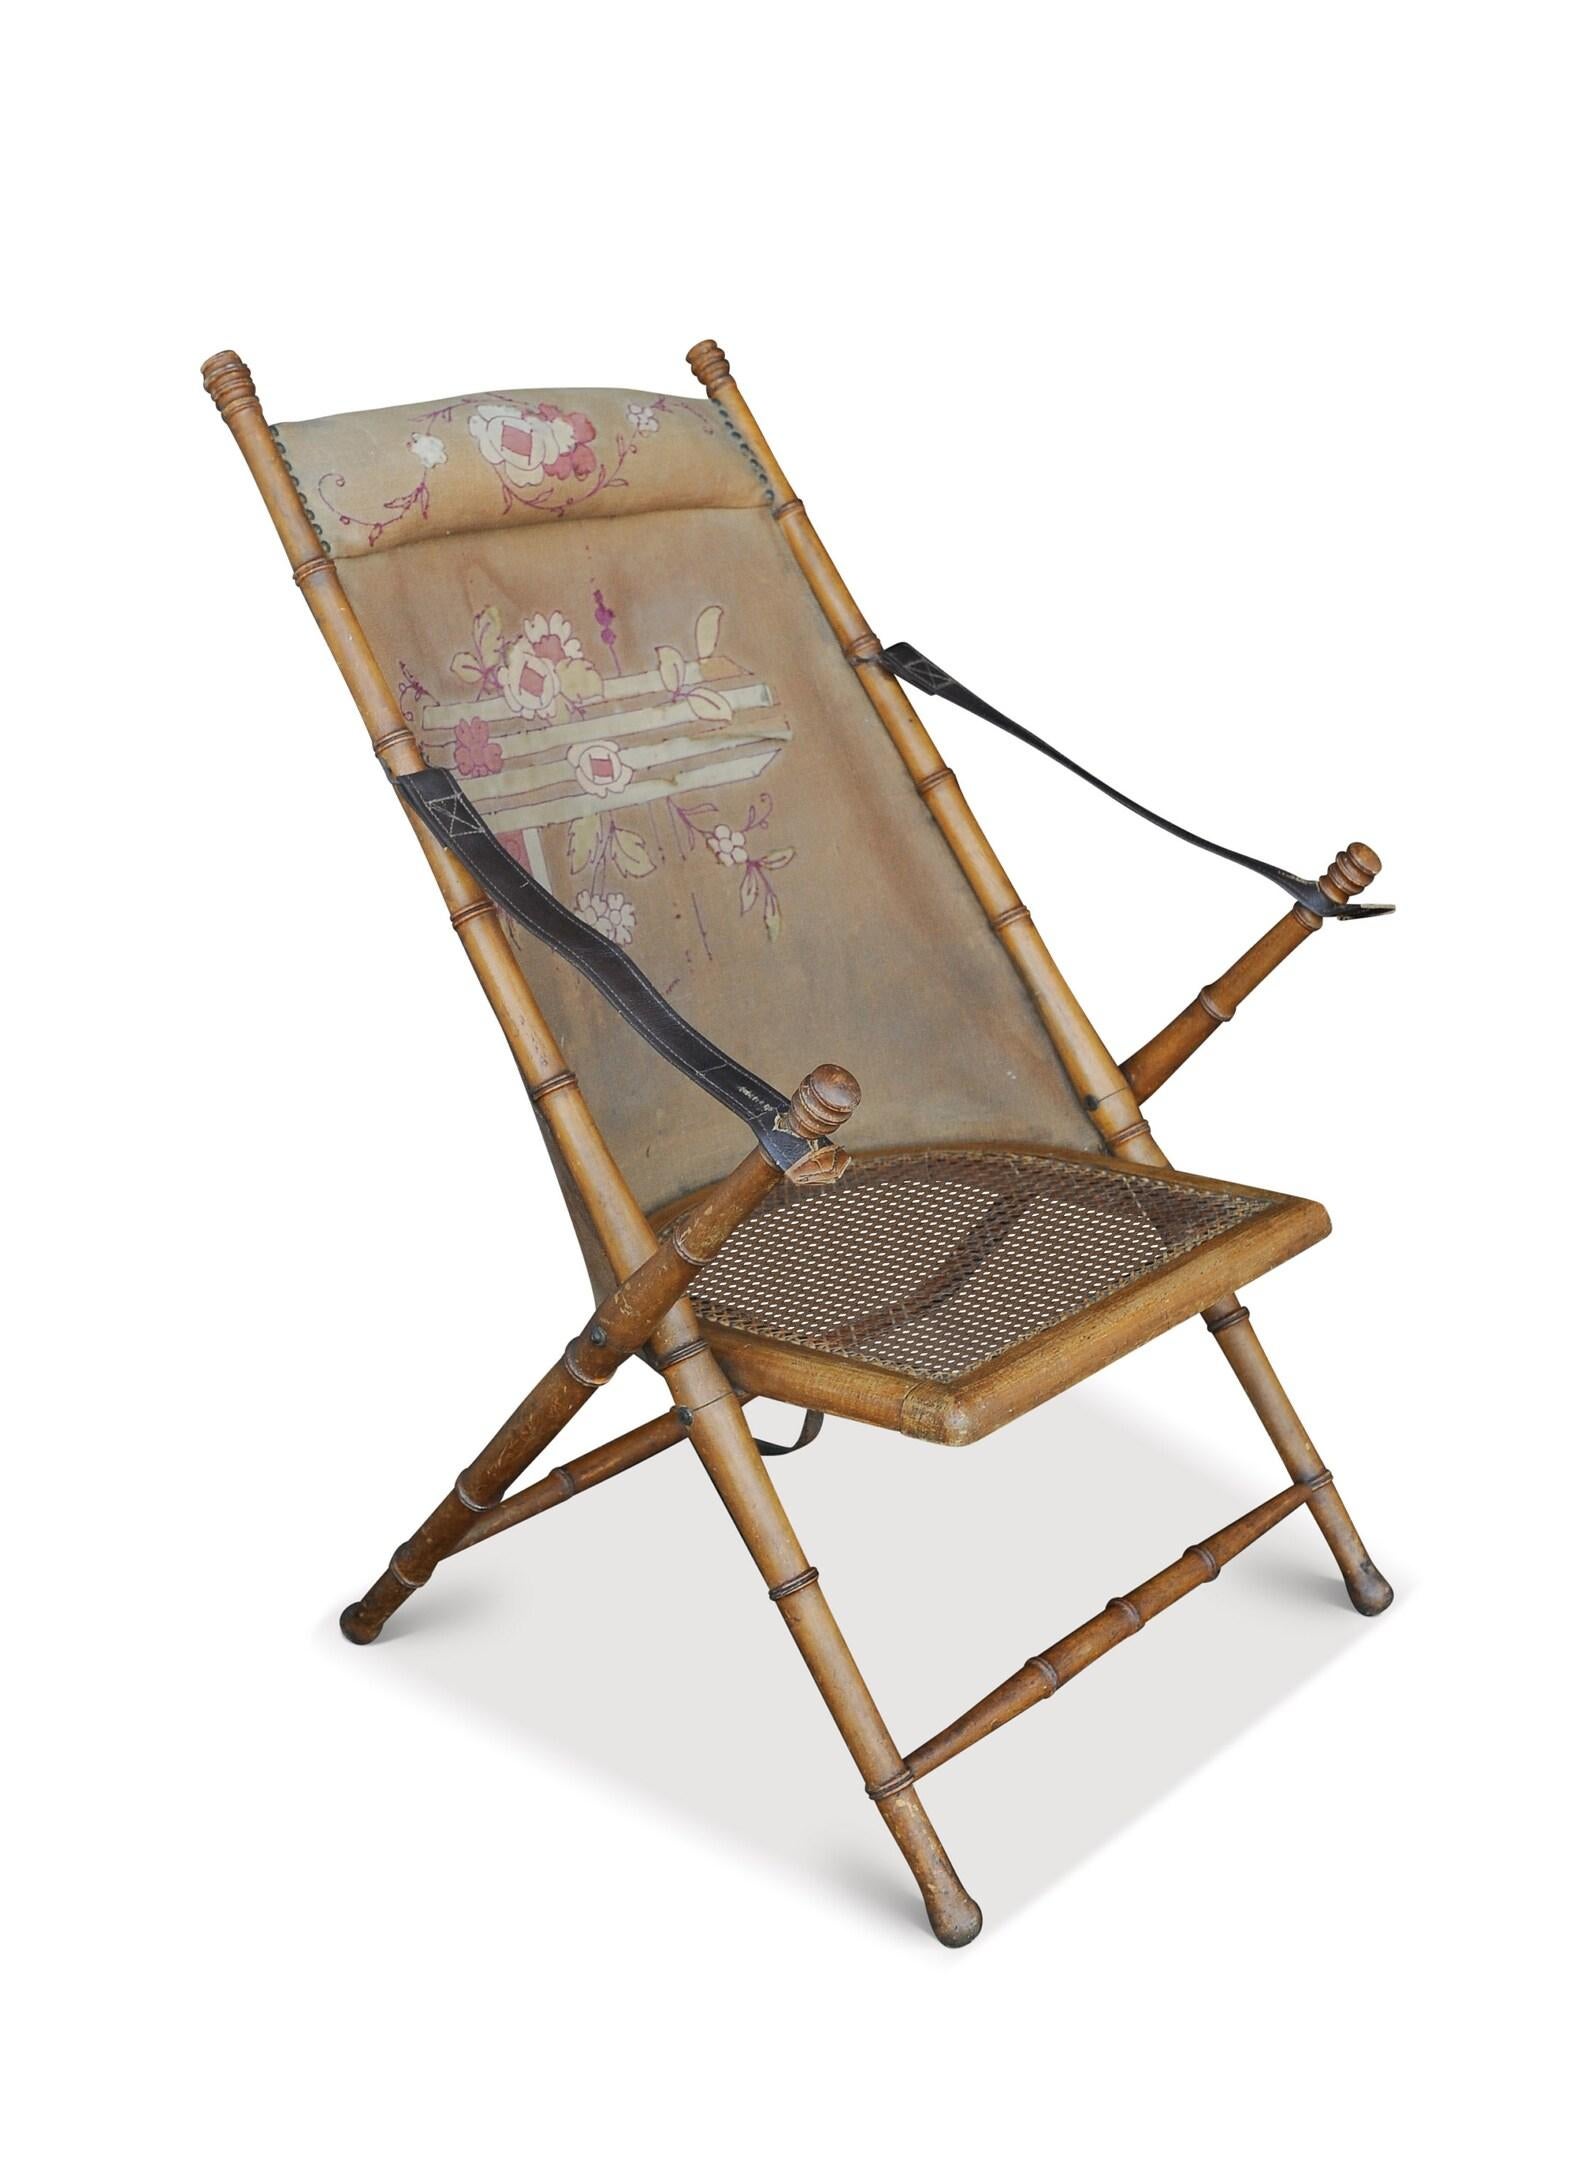 British Colonial Victorian Military Campaign Folding Faux Bamboo Embroidered Safari Canvas Chair For Sale